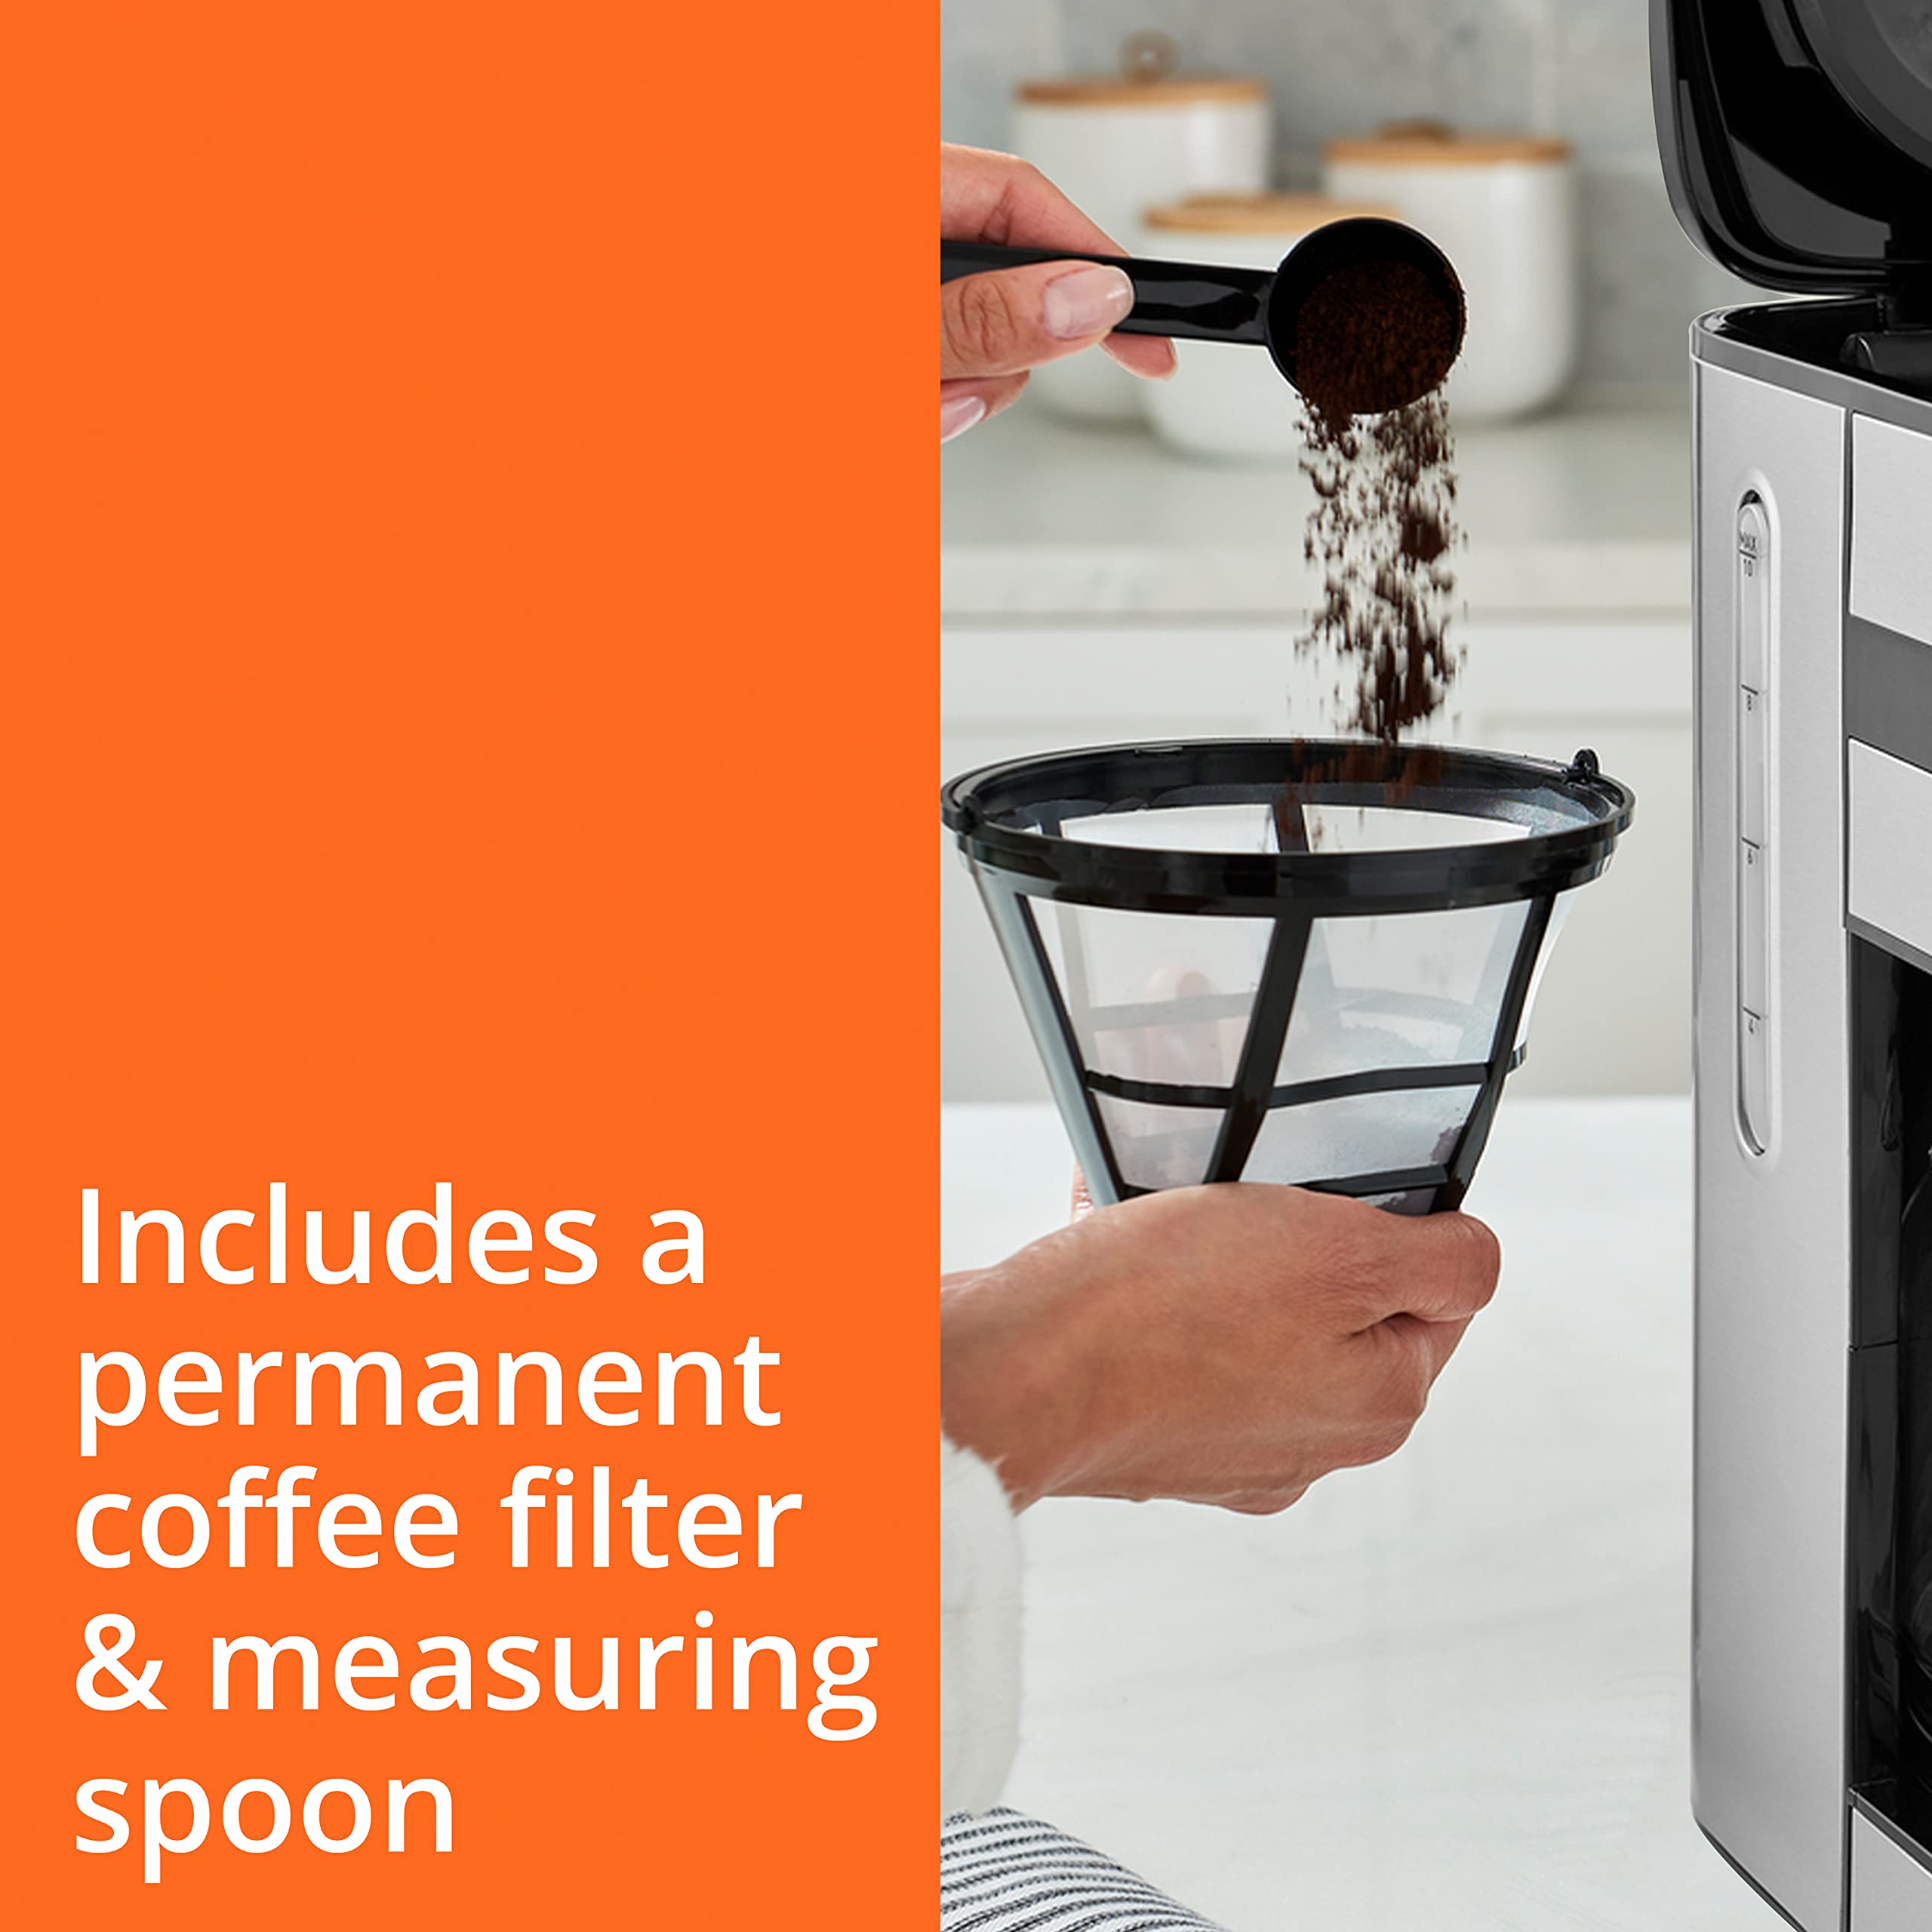 Krups Simply Brew Stainless Steel Drip Coffee Maker 10 Cup 900 Watts Digital Control, Coffee Filter, Drip Free, Dishwasher Safe Pot Silver and Black